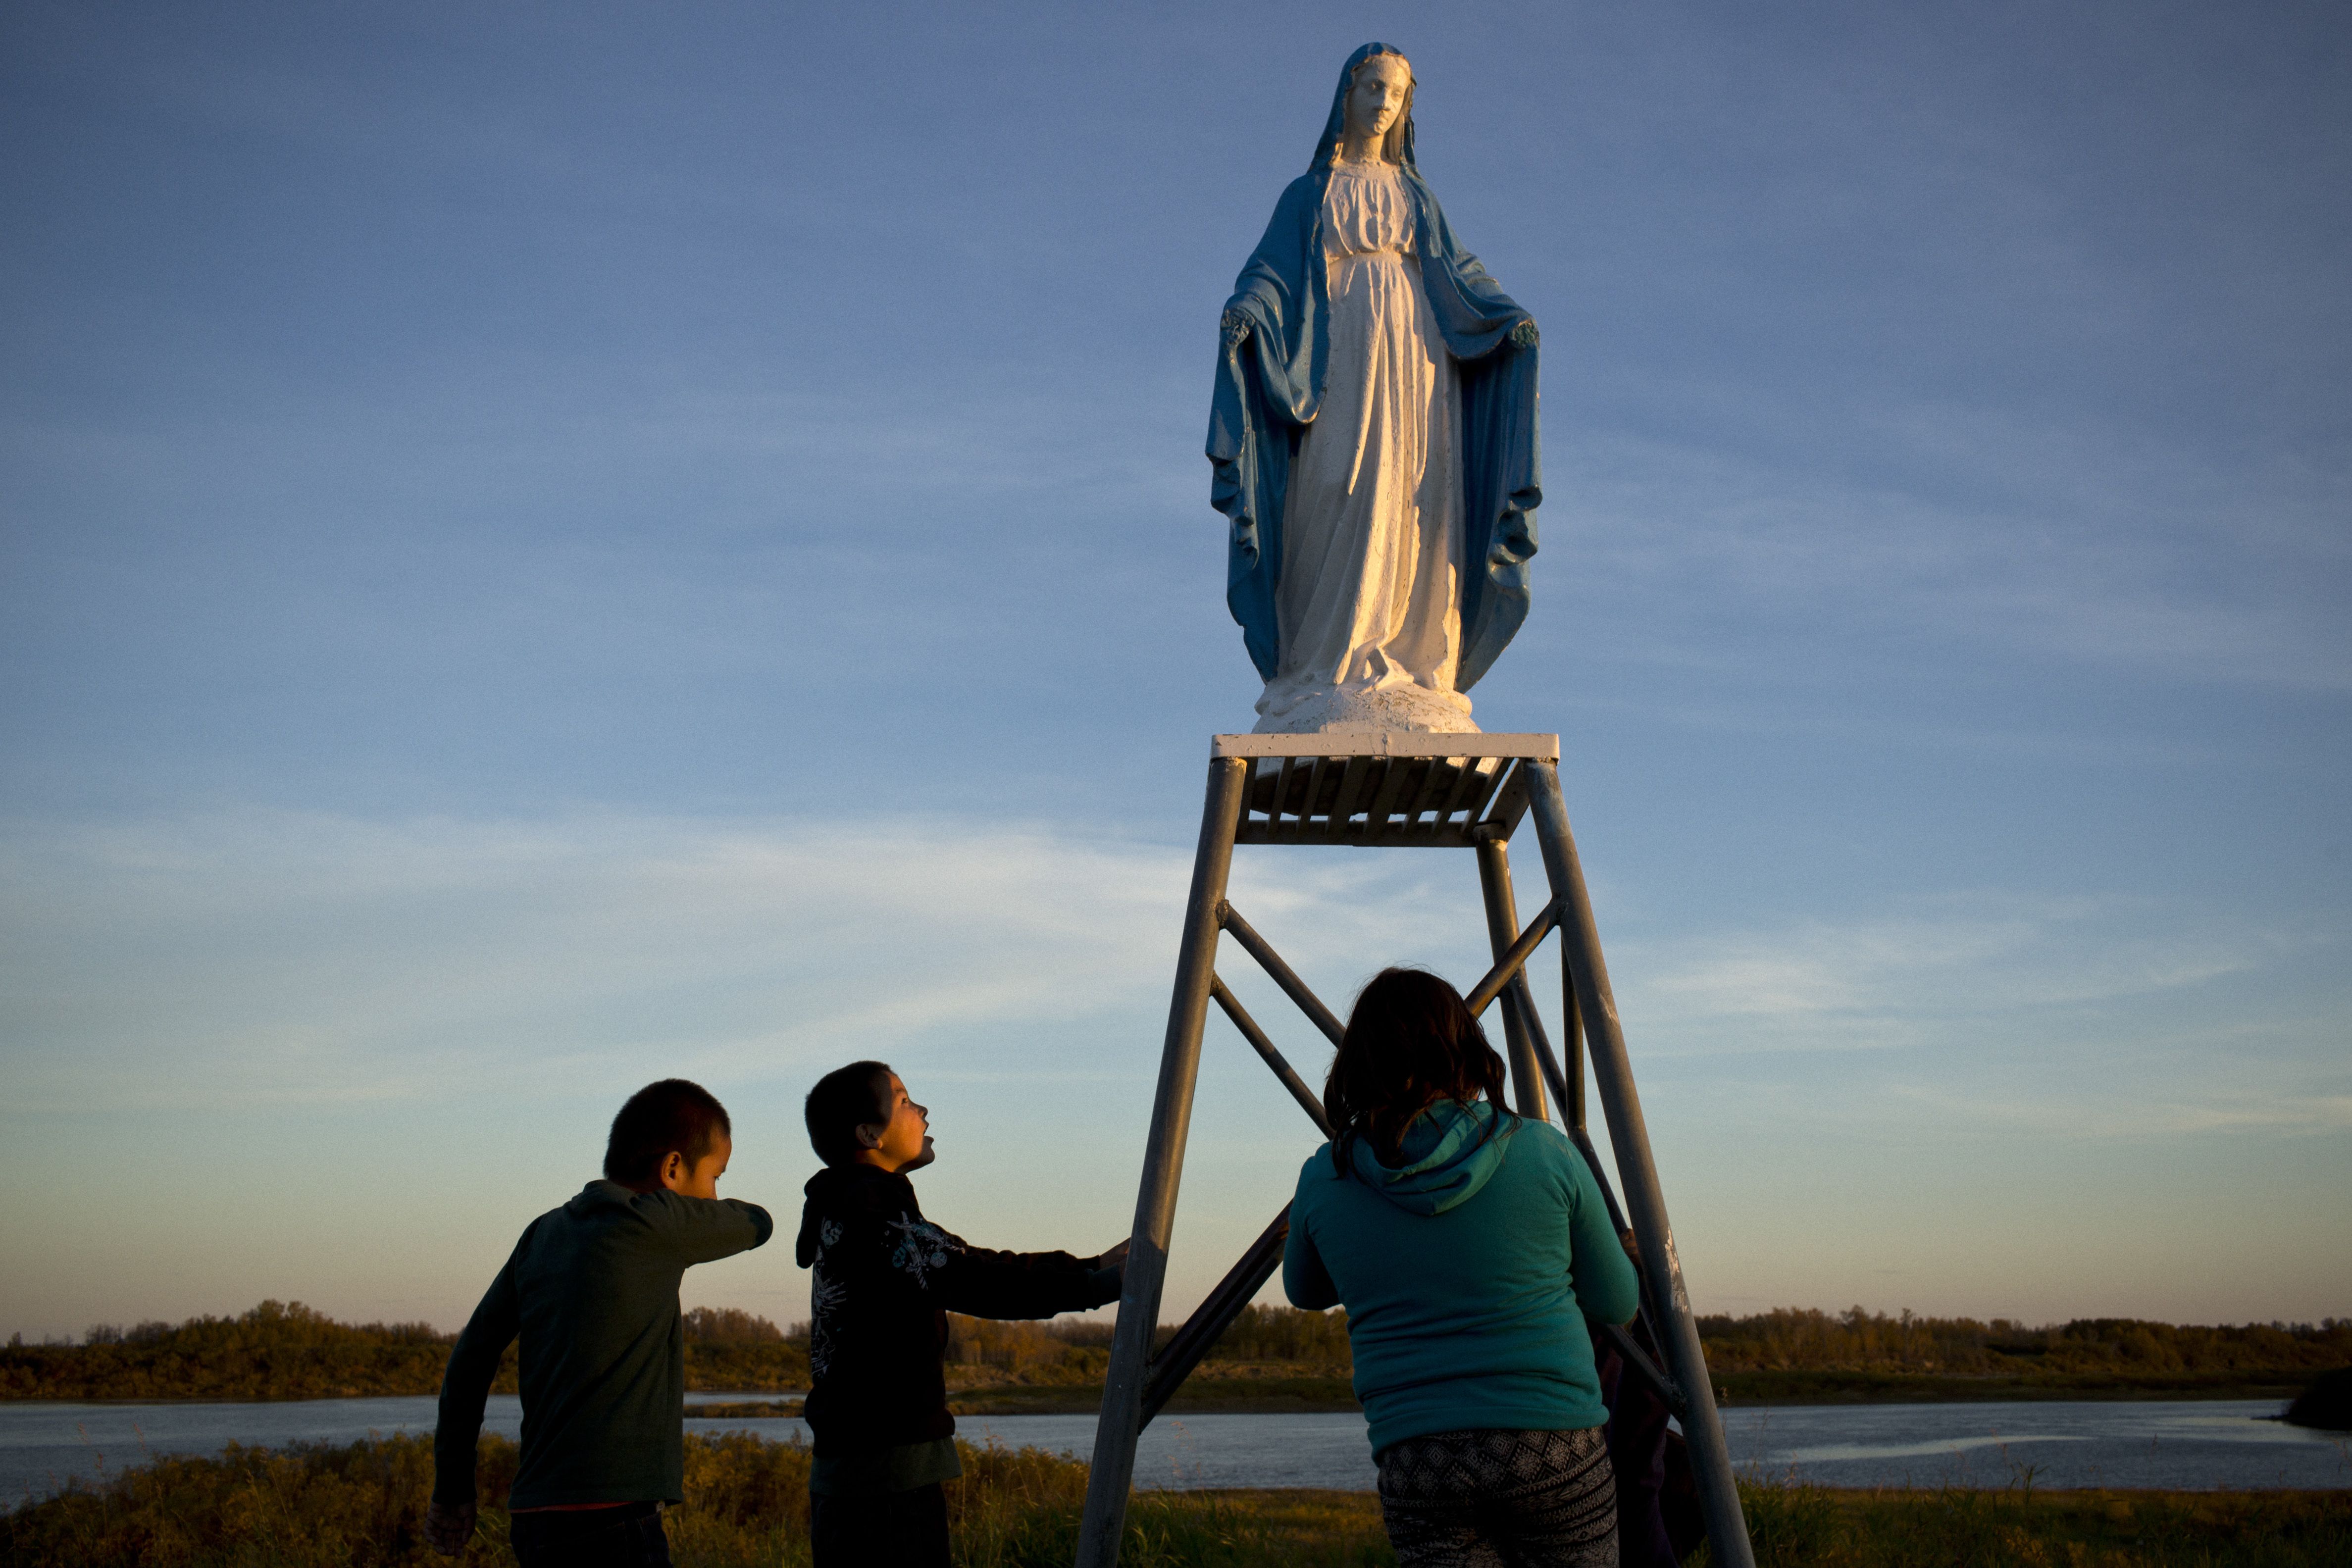 Young people play at a statue of the Virgin Mary near the St. Francois-Xavier Catholic Church on the shores of the Attawapiskat river. The community has a complicated history with the Catholic Church, since many of its members were subjected to horrible abuses while at the Catholic-run St. Anne’s residential school. A conversation with one 59-year-old man who had endured St Anne's for six years remained with me; he told me of repeated sexual and physical abuse at the hands of priests and nuns and, in one particular instance, a nun punched him and broke his nose when he was 11. It was the last time in his life that he was able to cry, he said. To this day he still carries deep shame and wishes he could express it through tears—however, even at the funerals of his parents and his own daughter, he hasn't been able to. At the same time, many in the community still connect to their Catholic faith, a testament to their forgiveness. Image by David Maurice Smith. Canada, 2016.